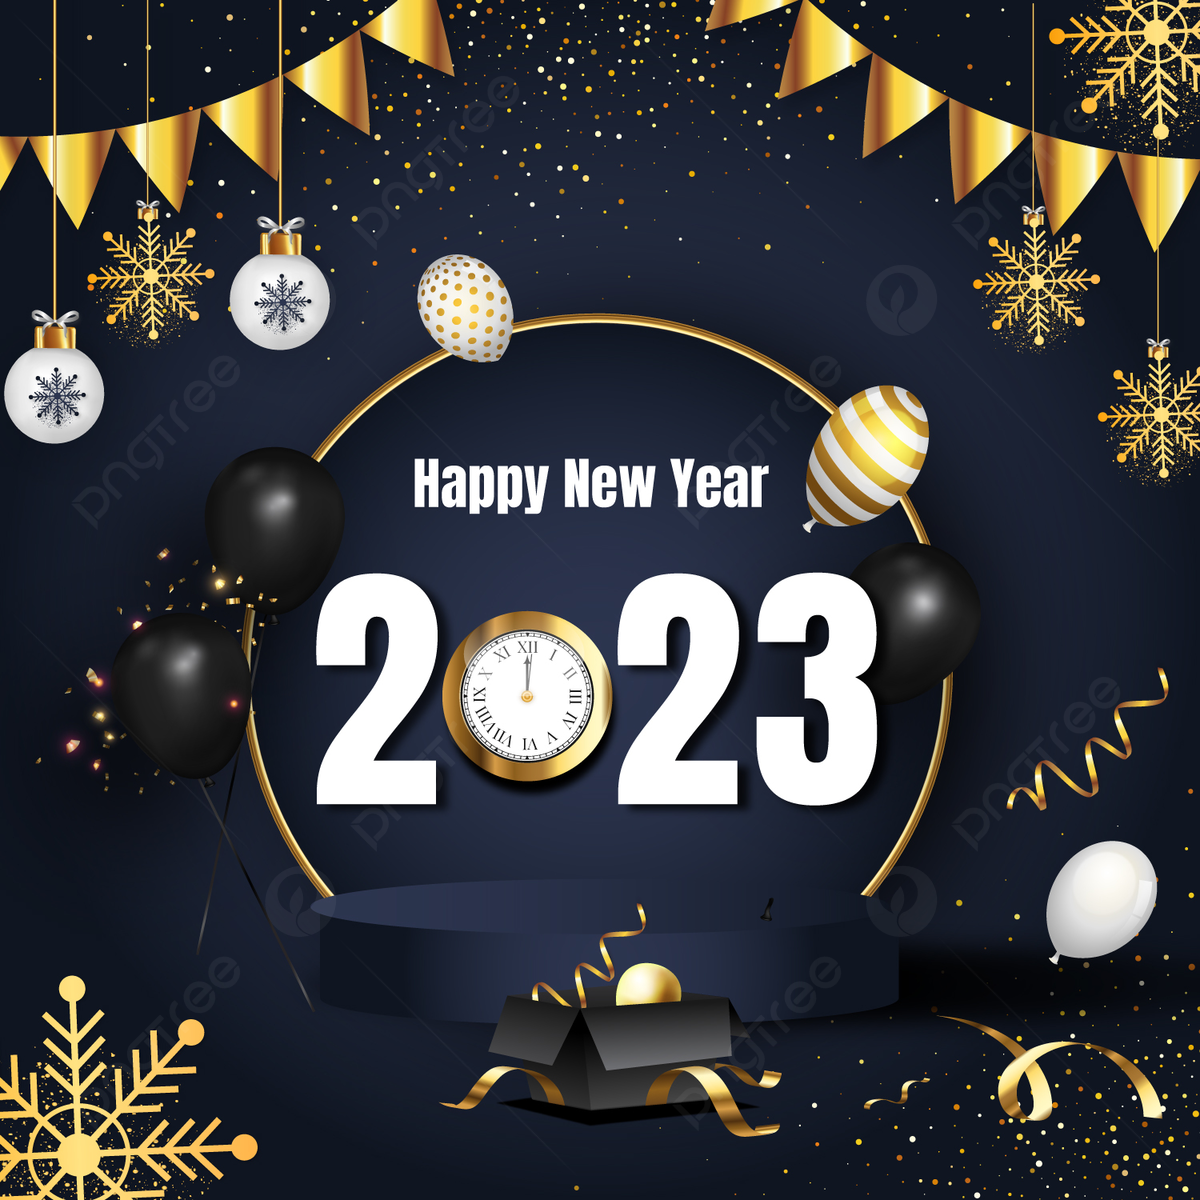 Happy New Year 2023 Messages Wallpaper HD For Mobile Phone 1920x1200 1  1920x1080 1  WishesPhotos